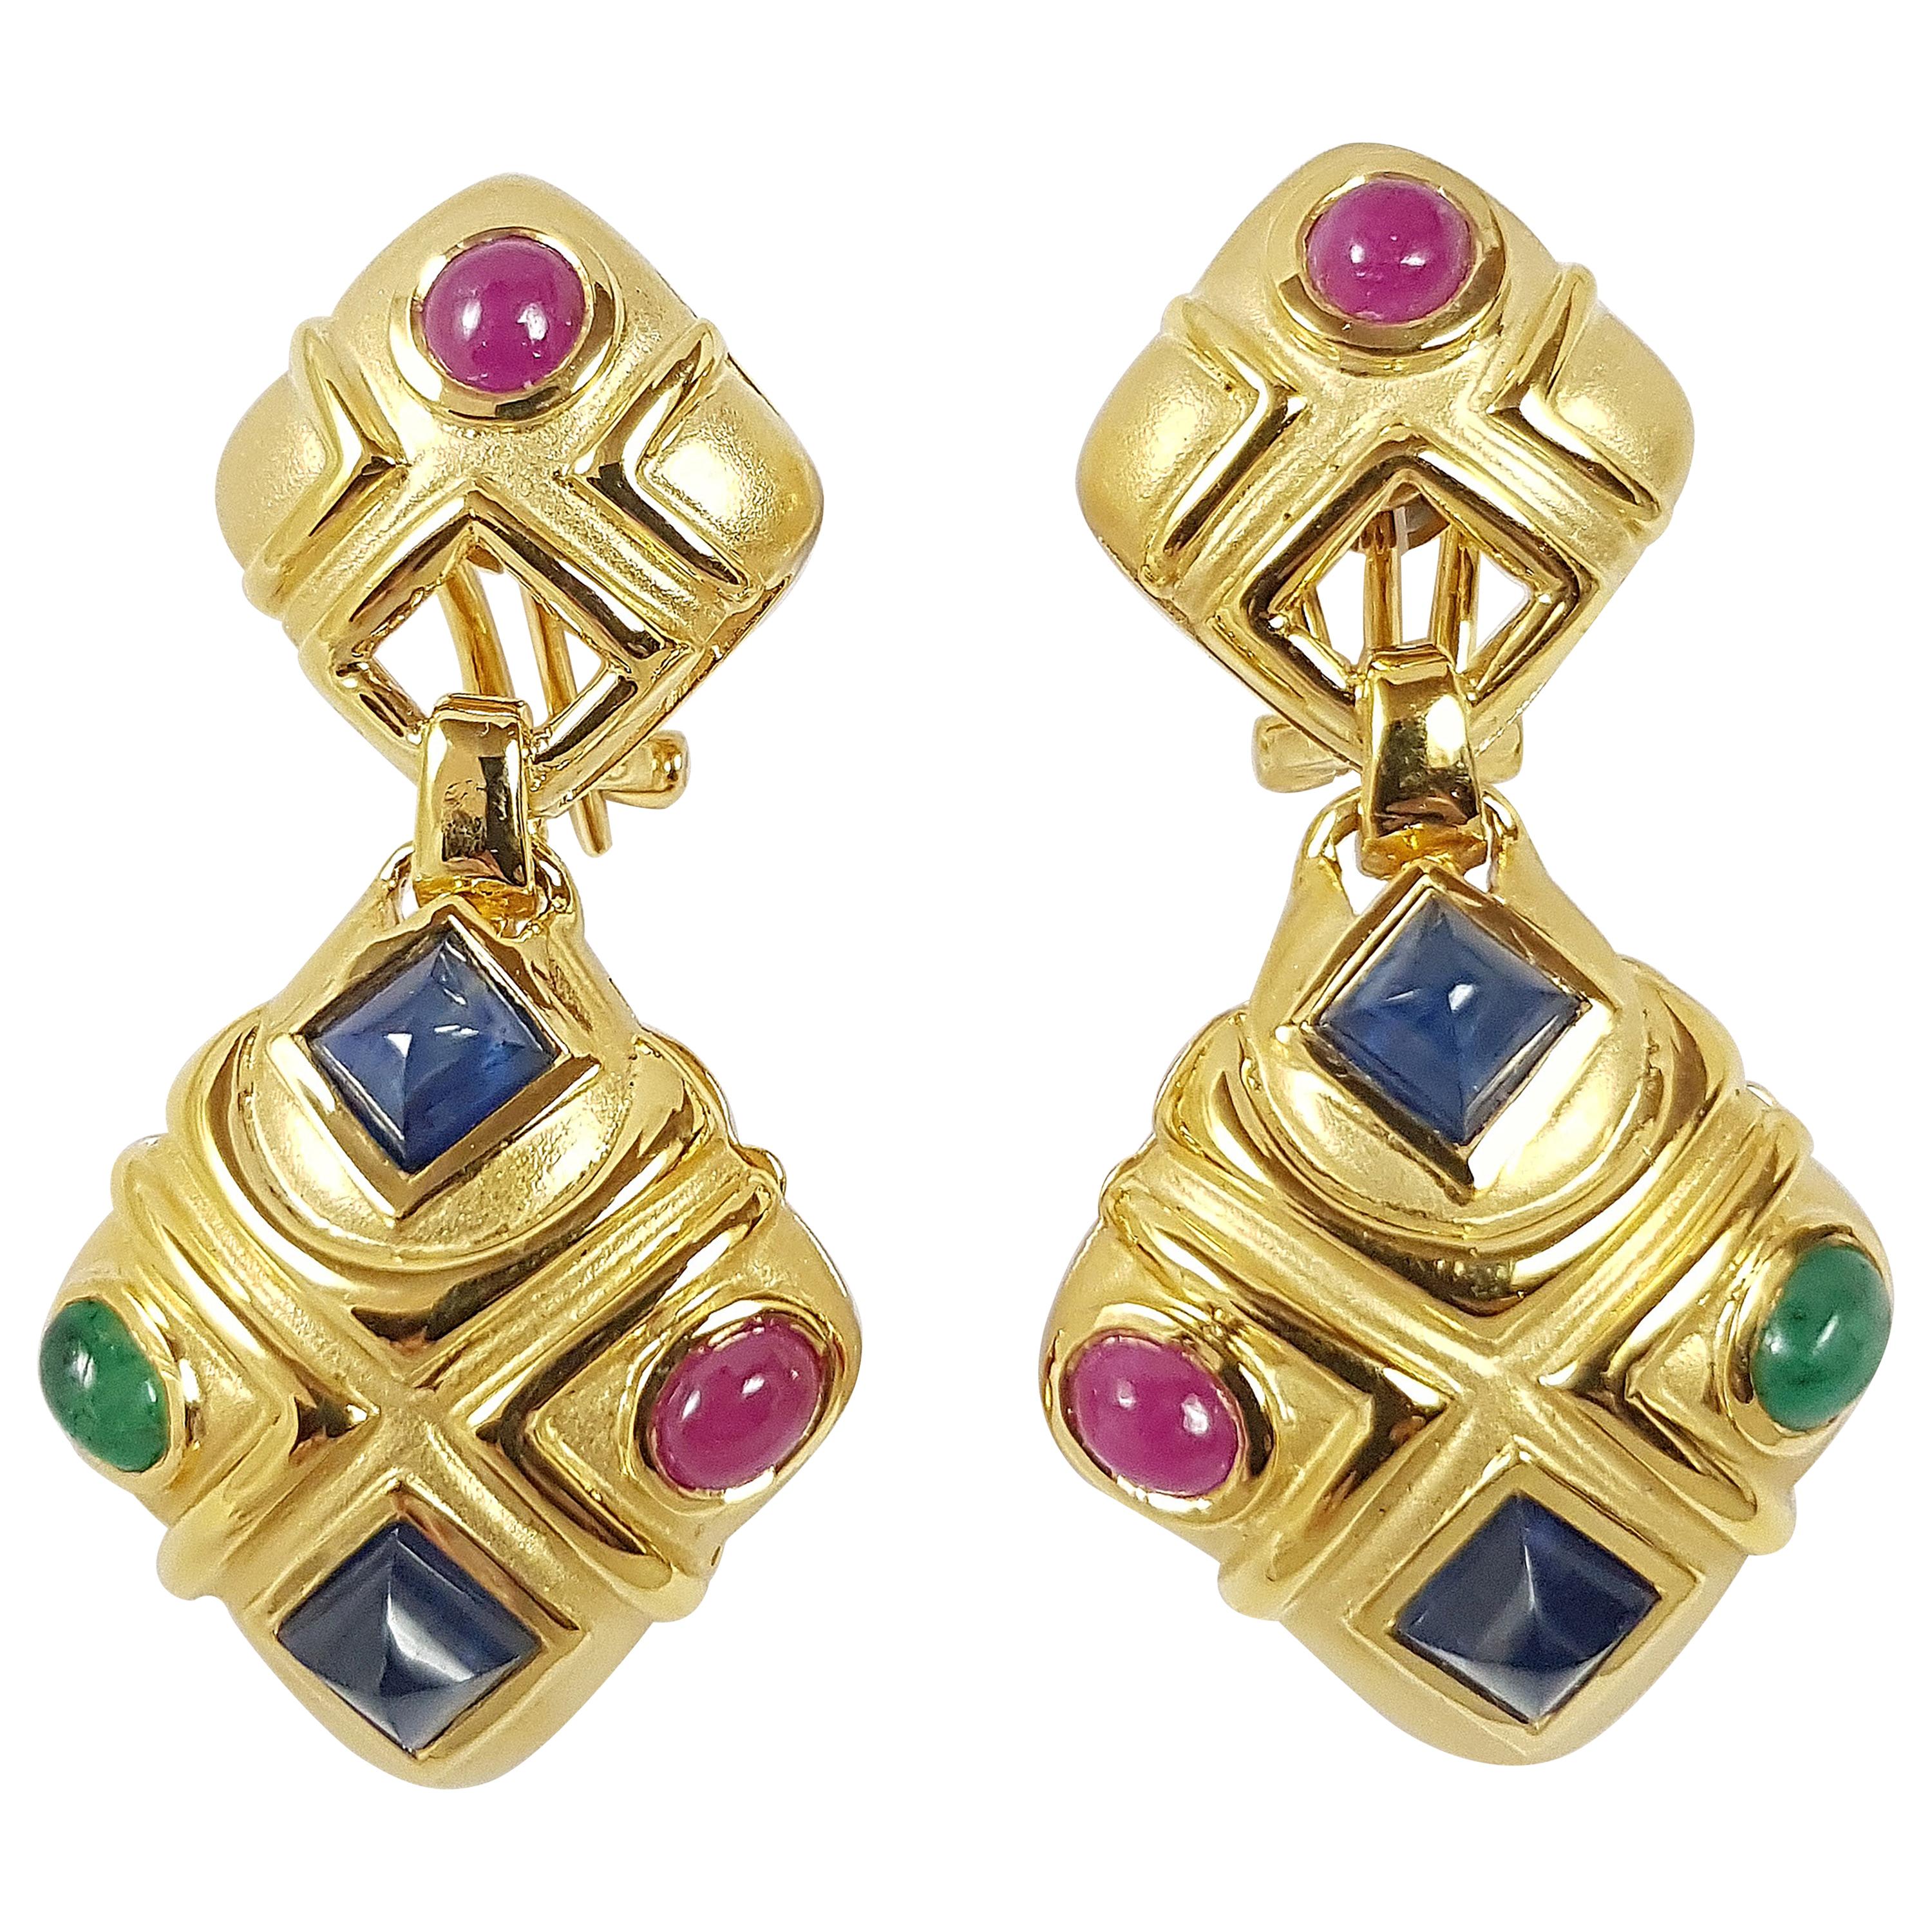 Cabochon Blue Sapphire, Cabochon Ruby, Cabochon Emerald Earrings Set in 18 Karat For Sale